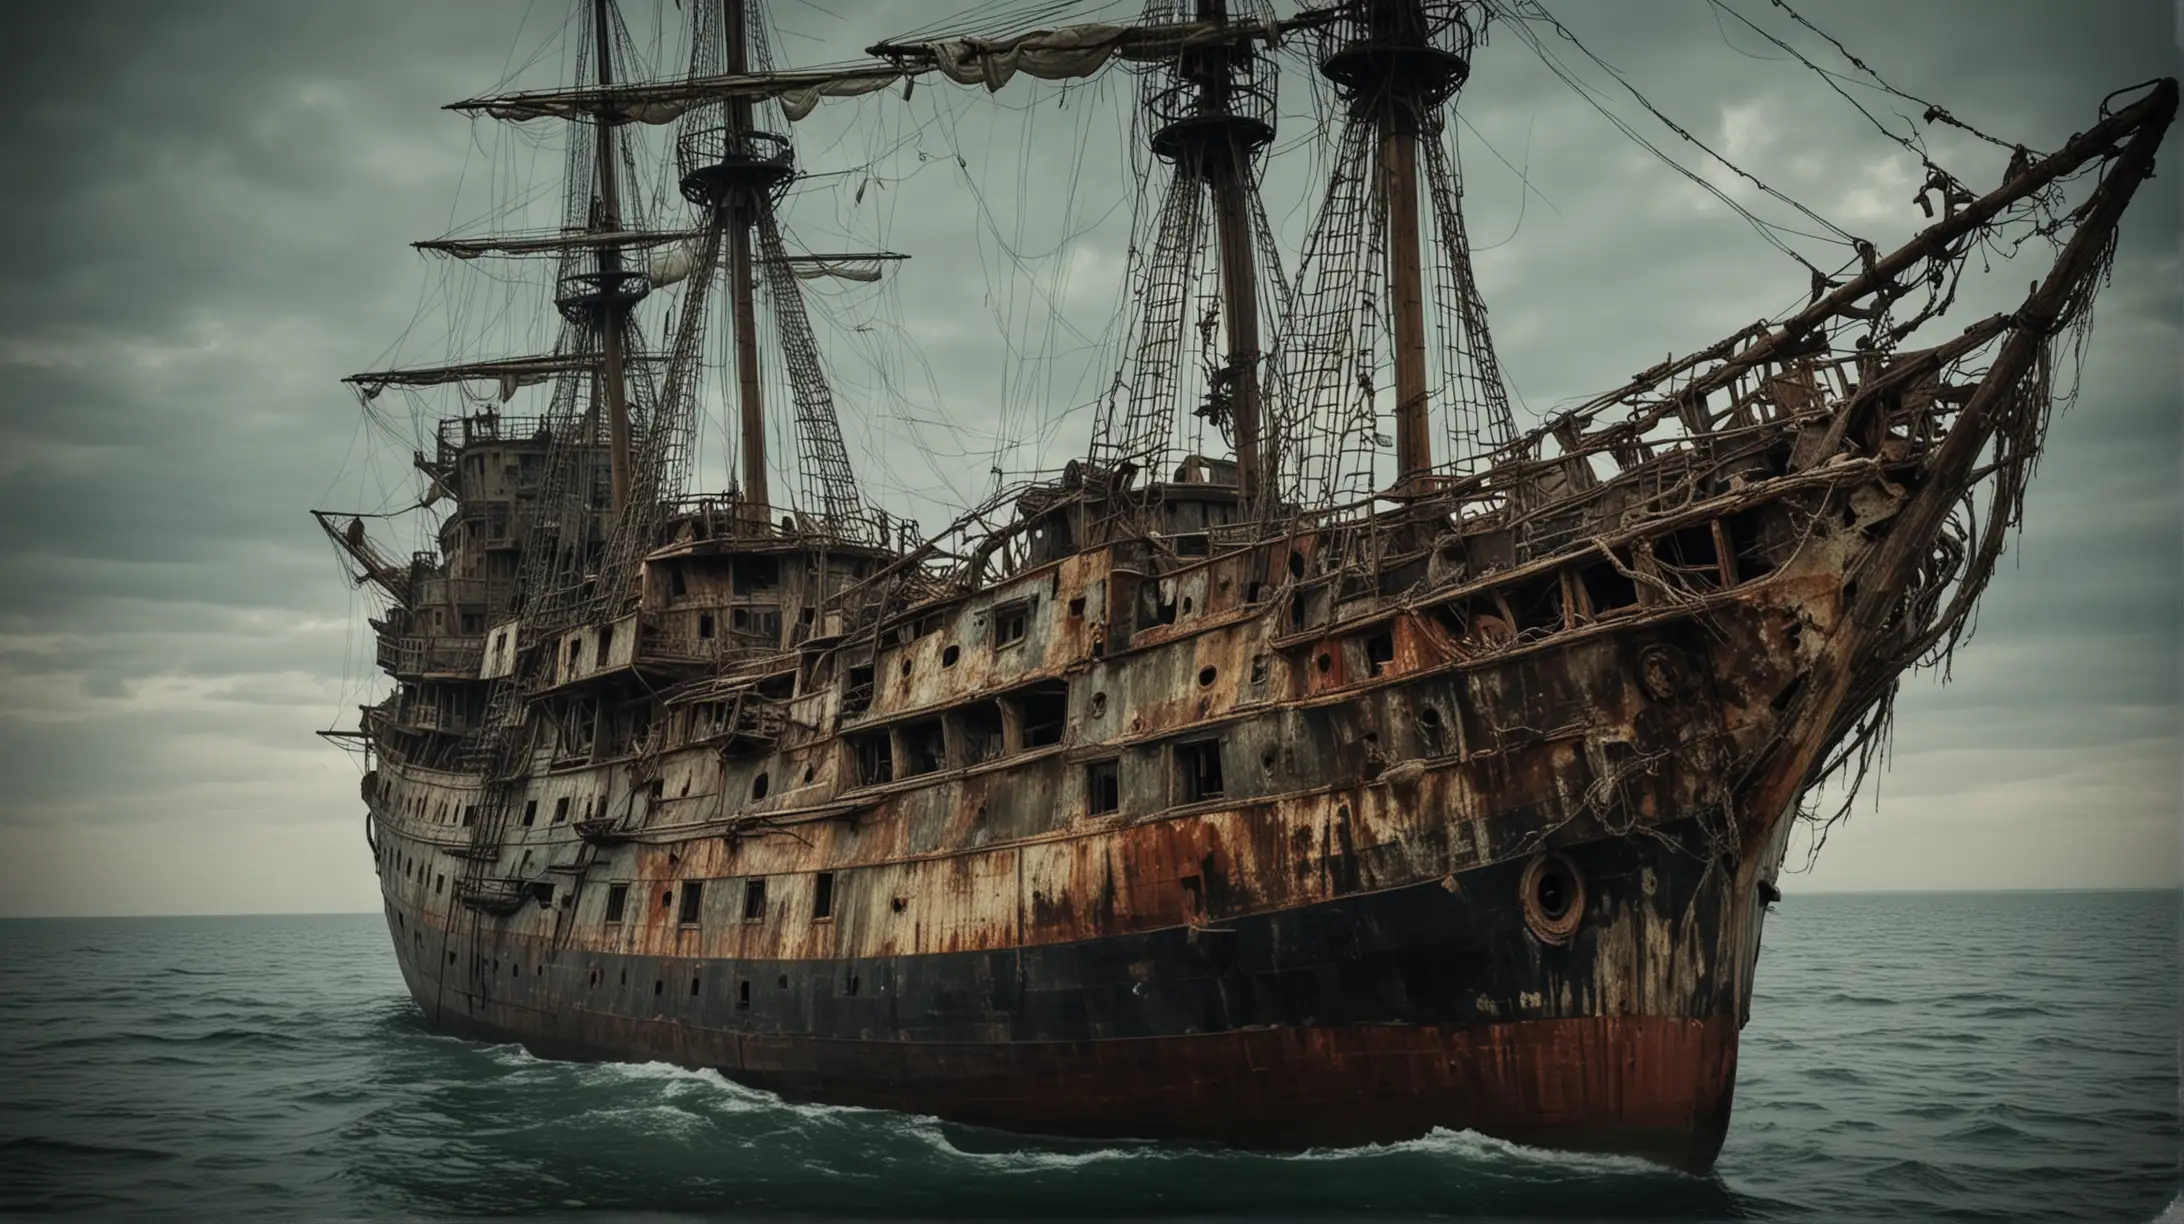 old ship. halv of it beautiful, the other half infected

 

